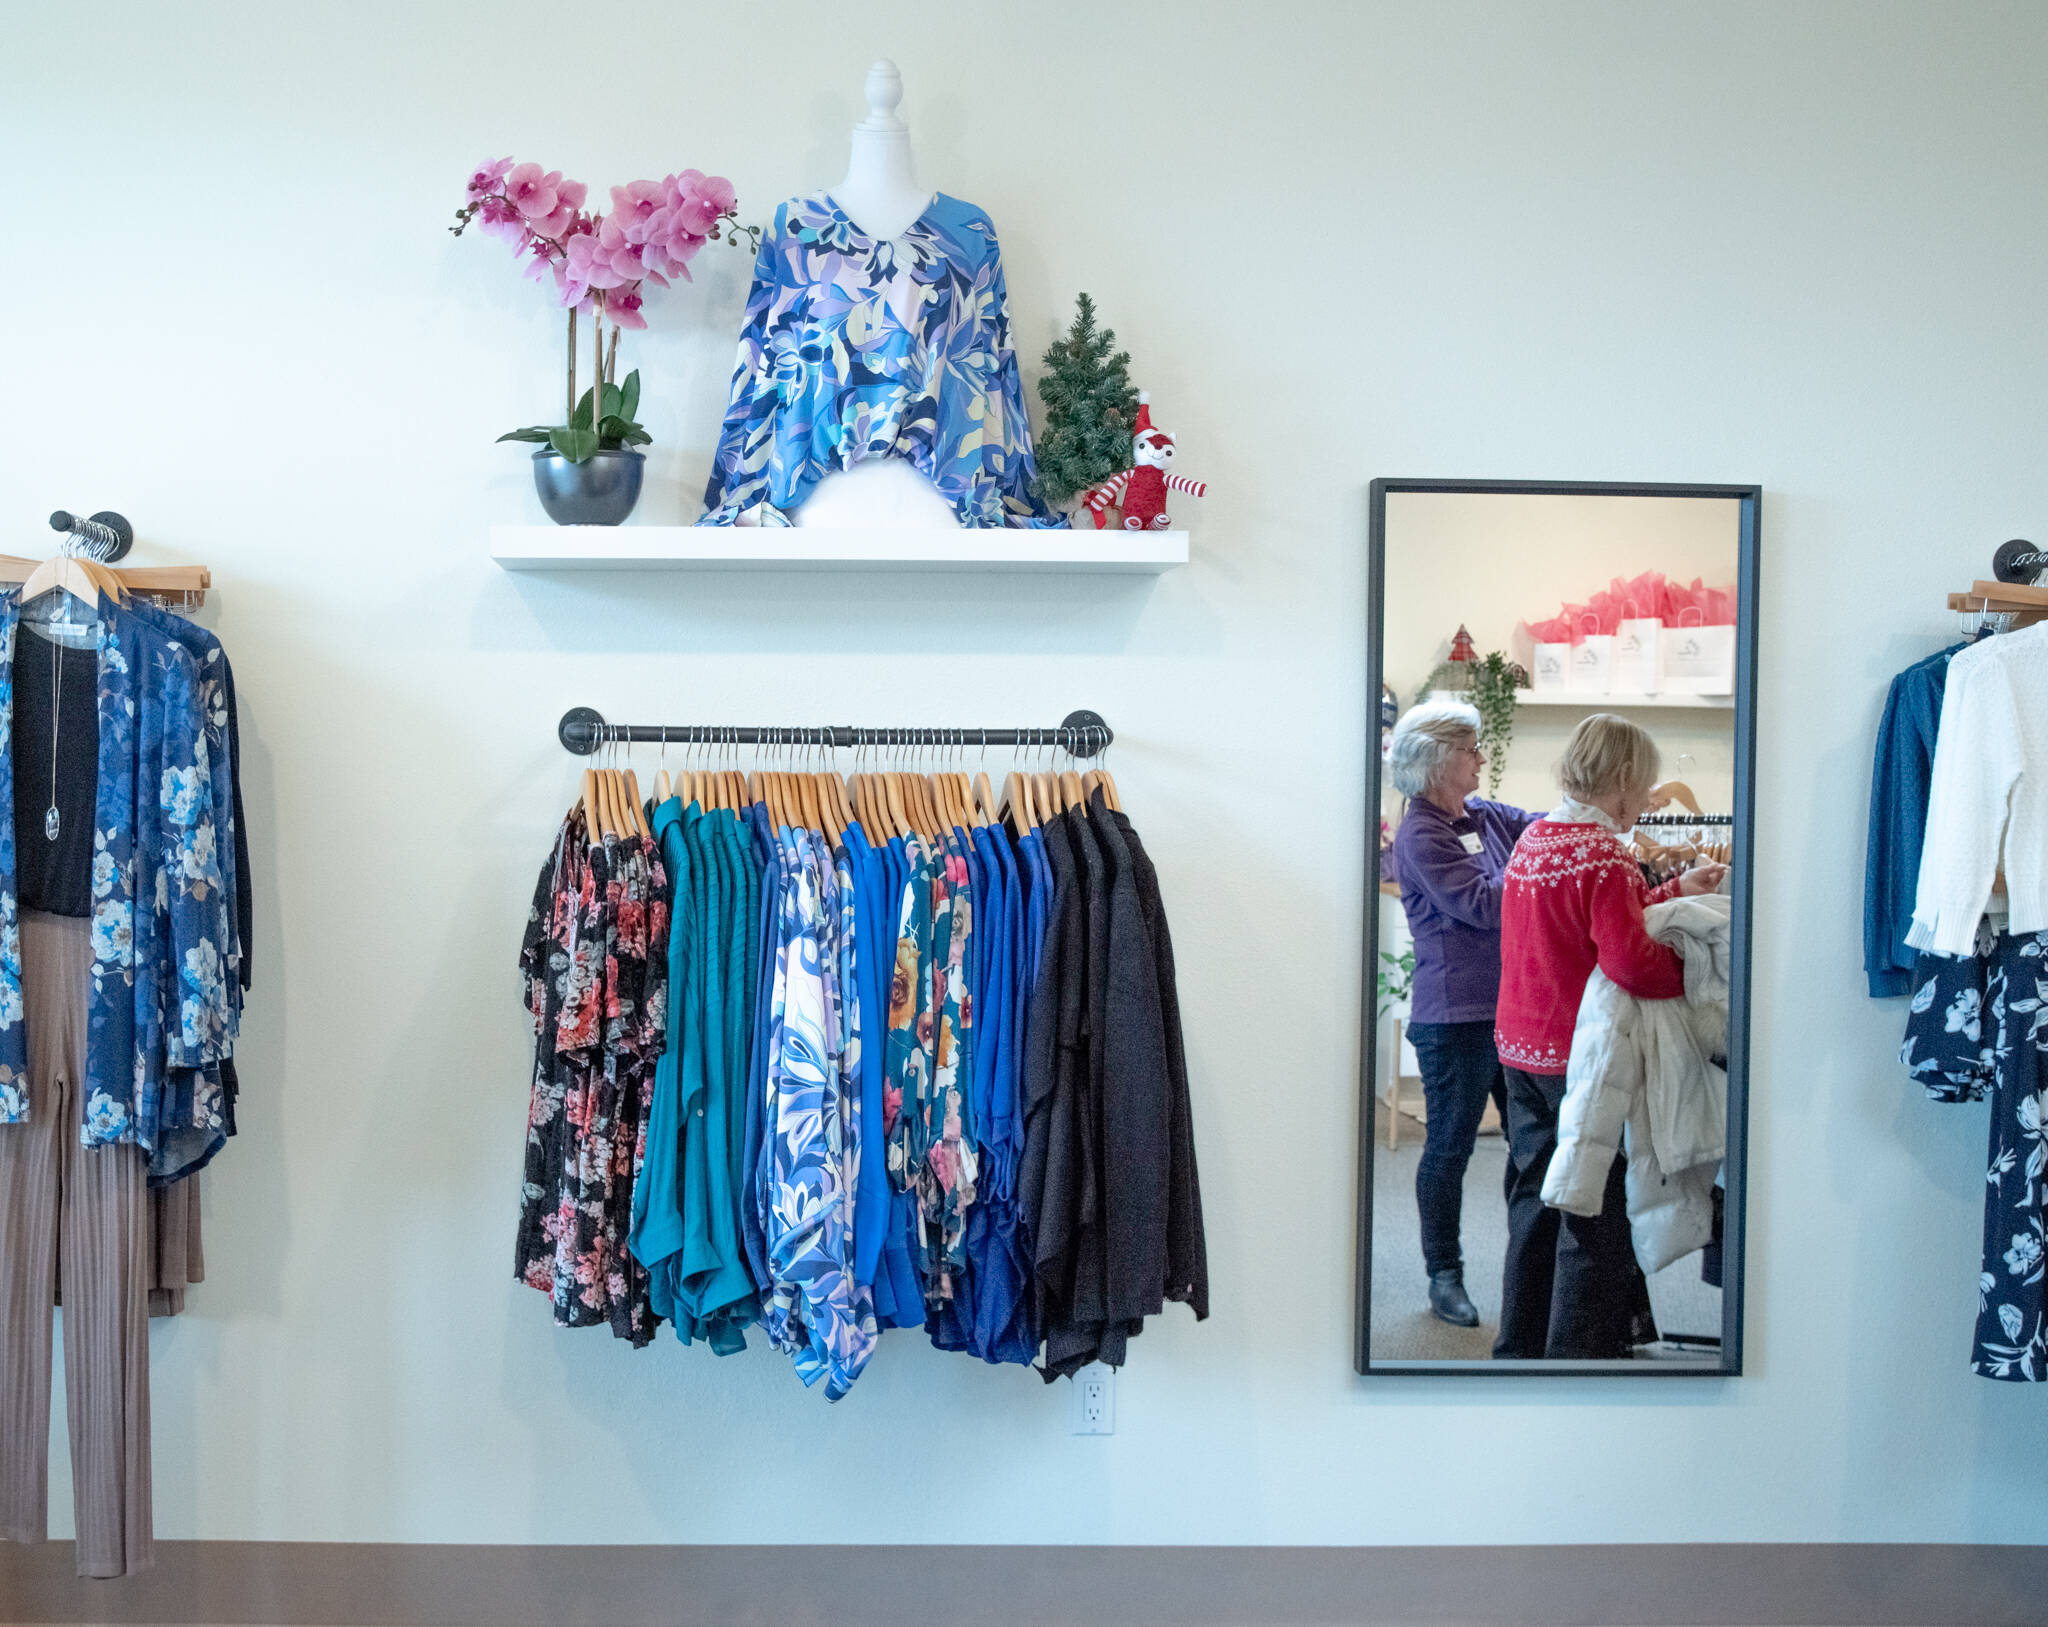 Be Blossom Boutique, a new women's and teen clothing store at 161 W. Washington St., offers clothing for all body types.